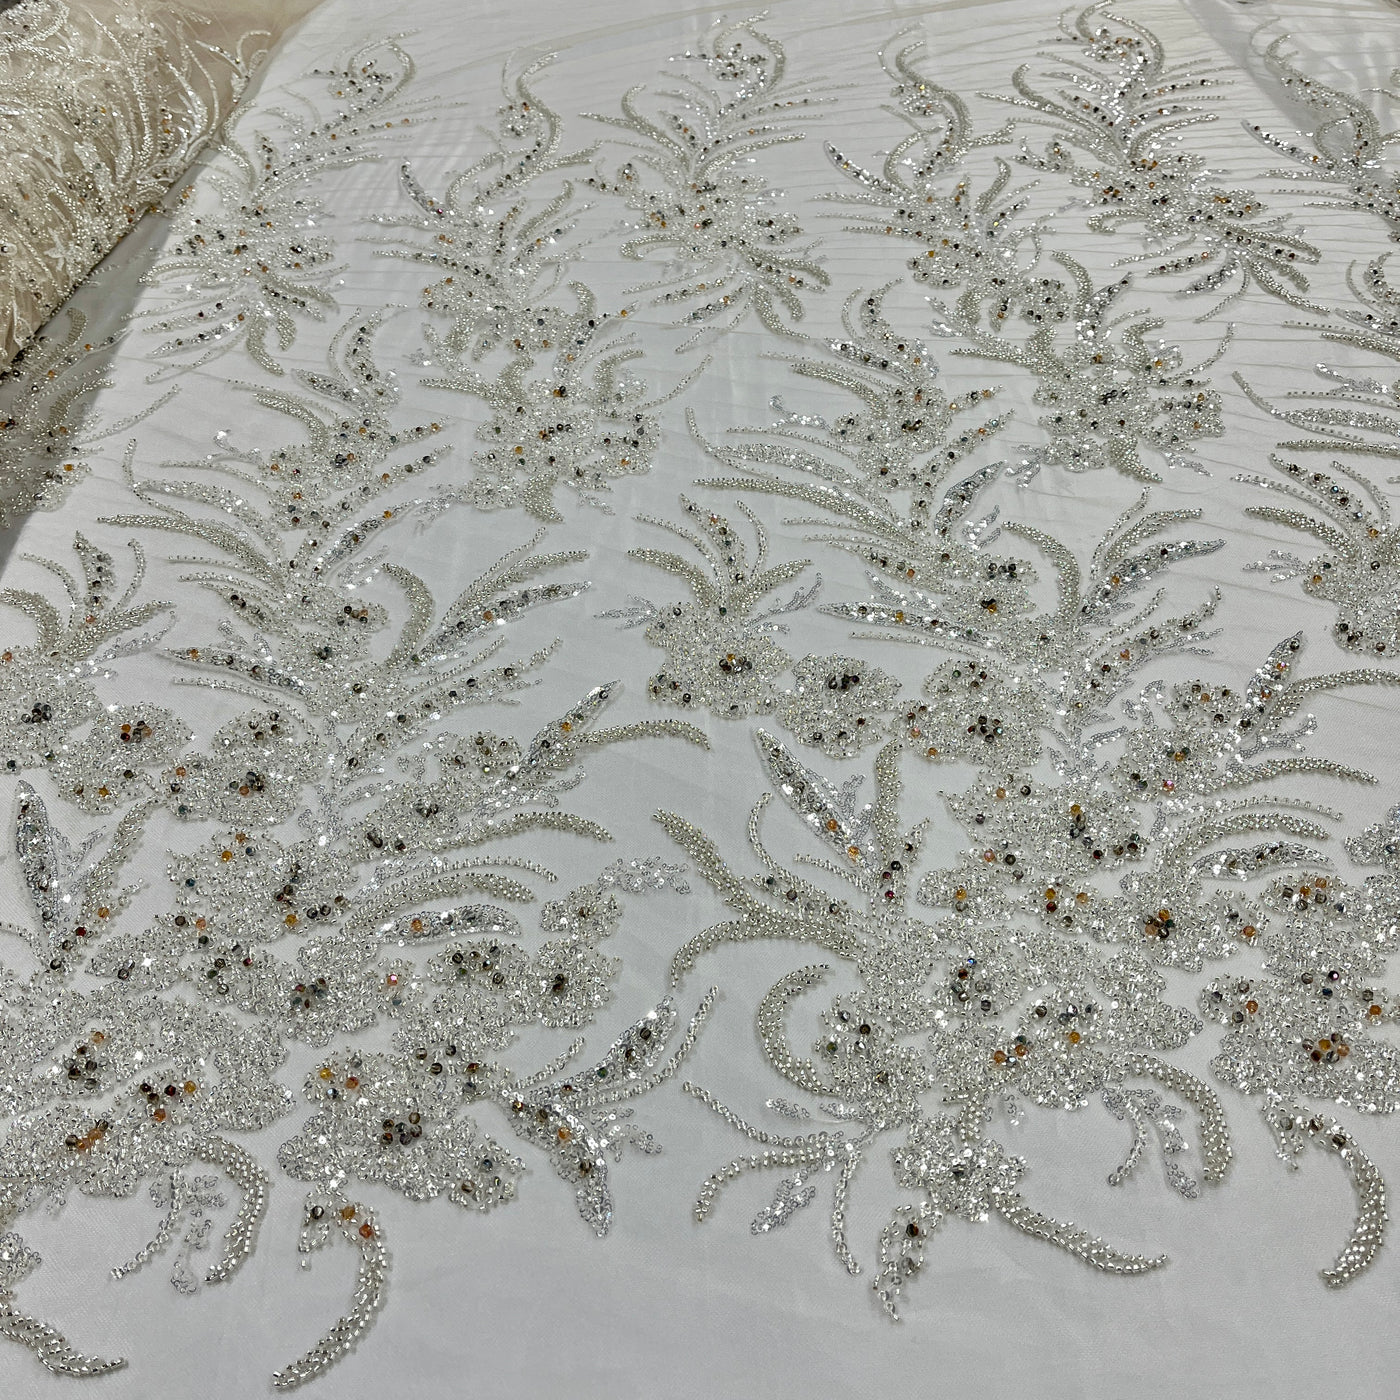 Beaded Lace Fabric Embroidered on 100% Polyester Net Mesh | Lace USA - GD-266 50" Wide